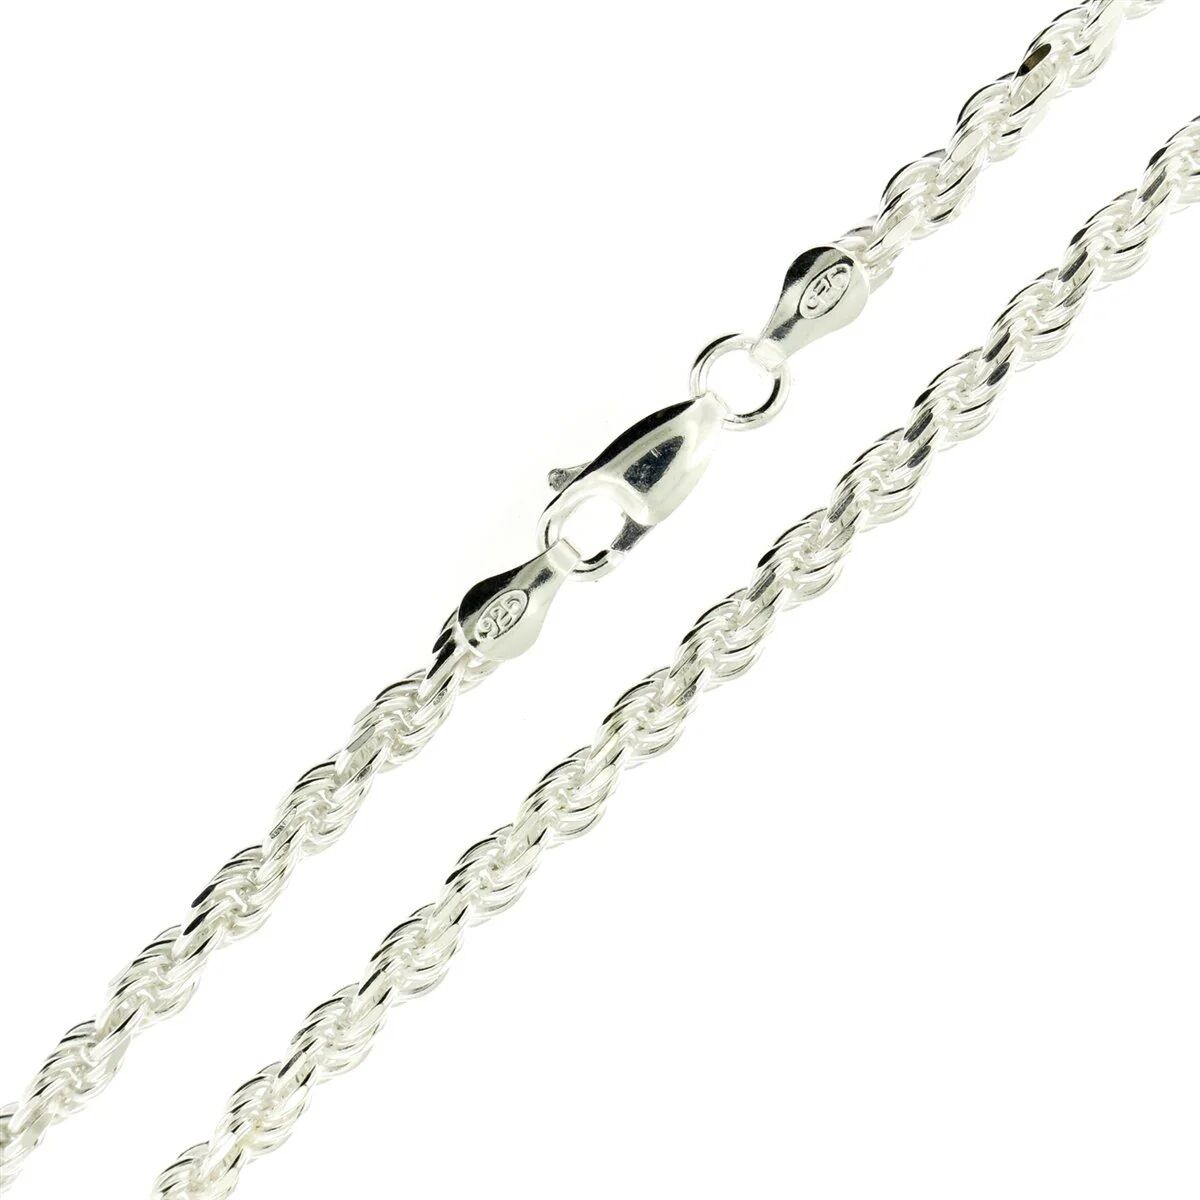 DailySale 925 Sterling Silver Diamond Cut Rope Chain 1.5mm